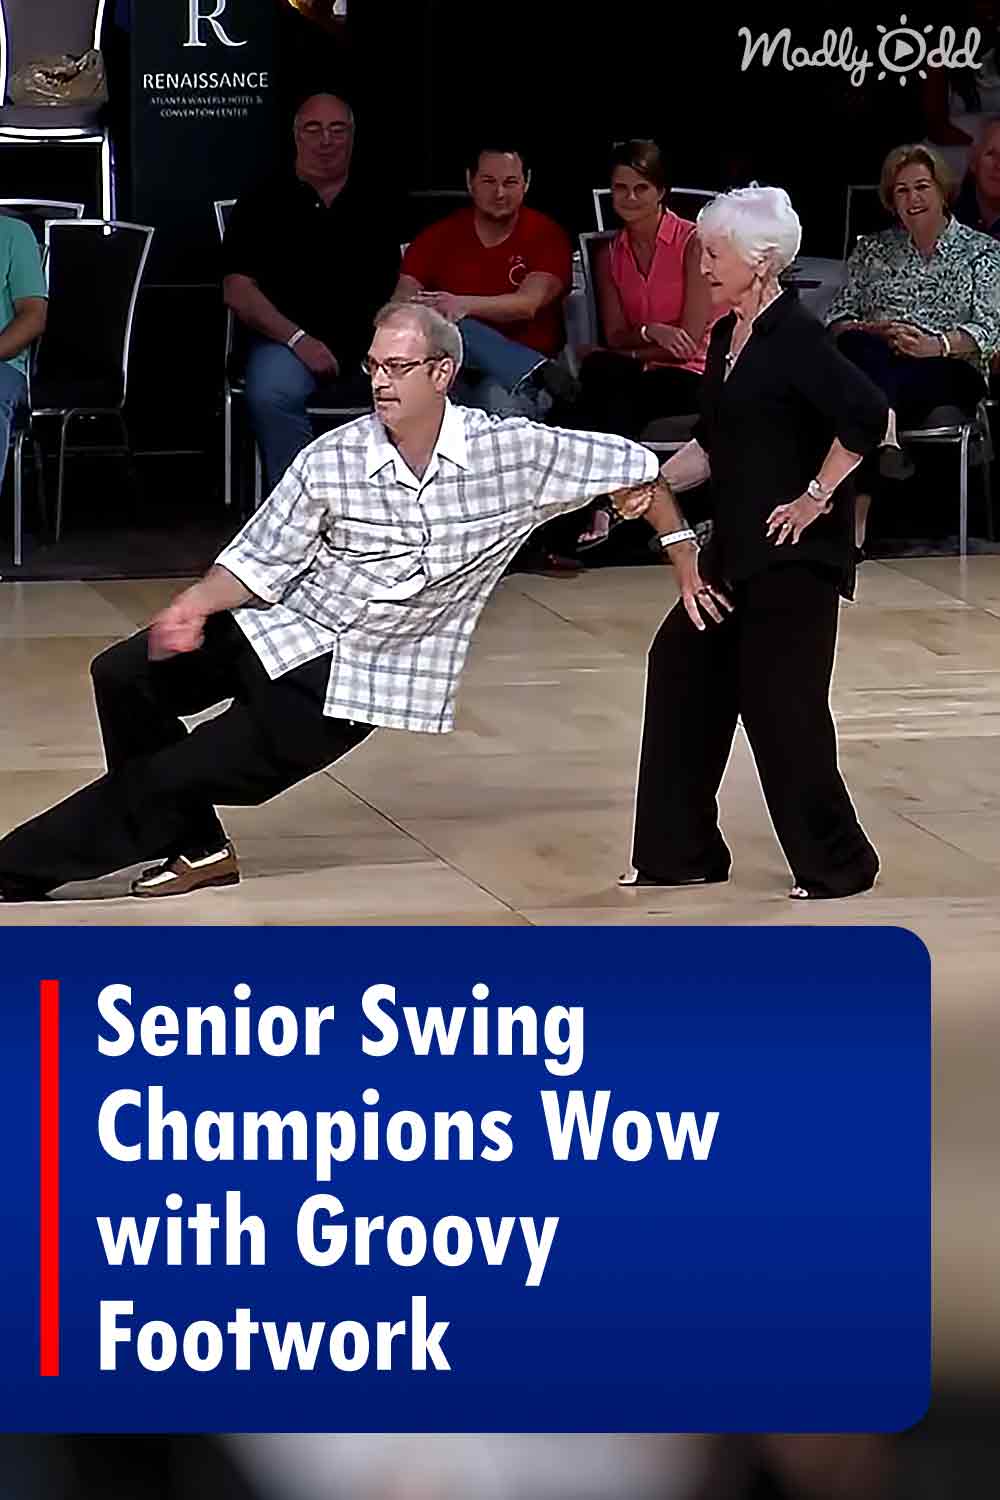 Senior Swing Champions Wow with Groovy Footwork